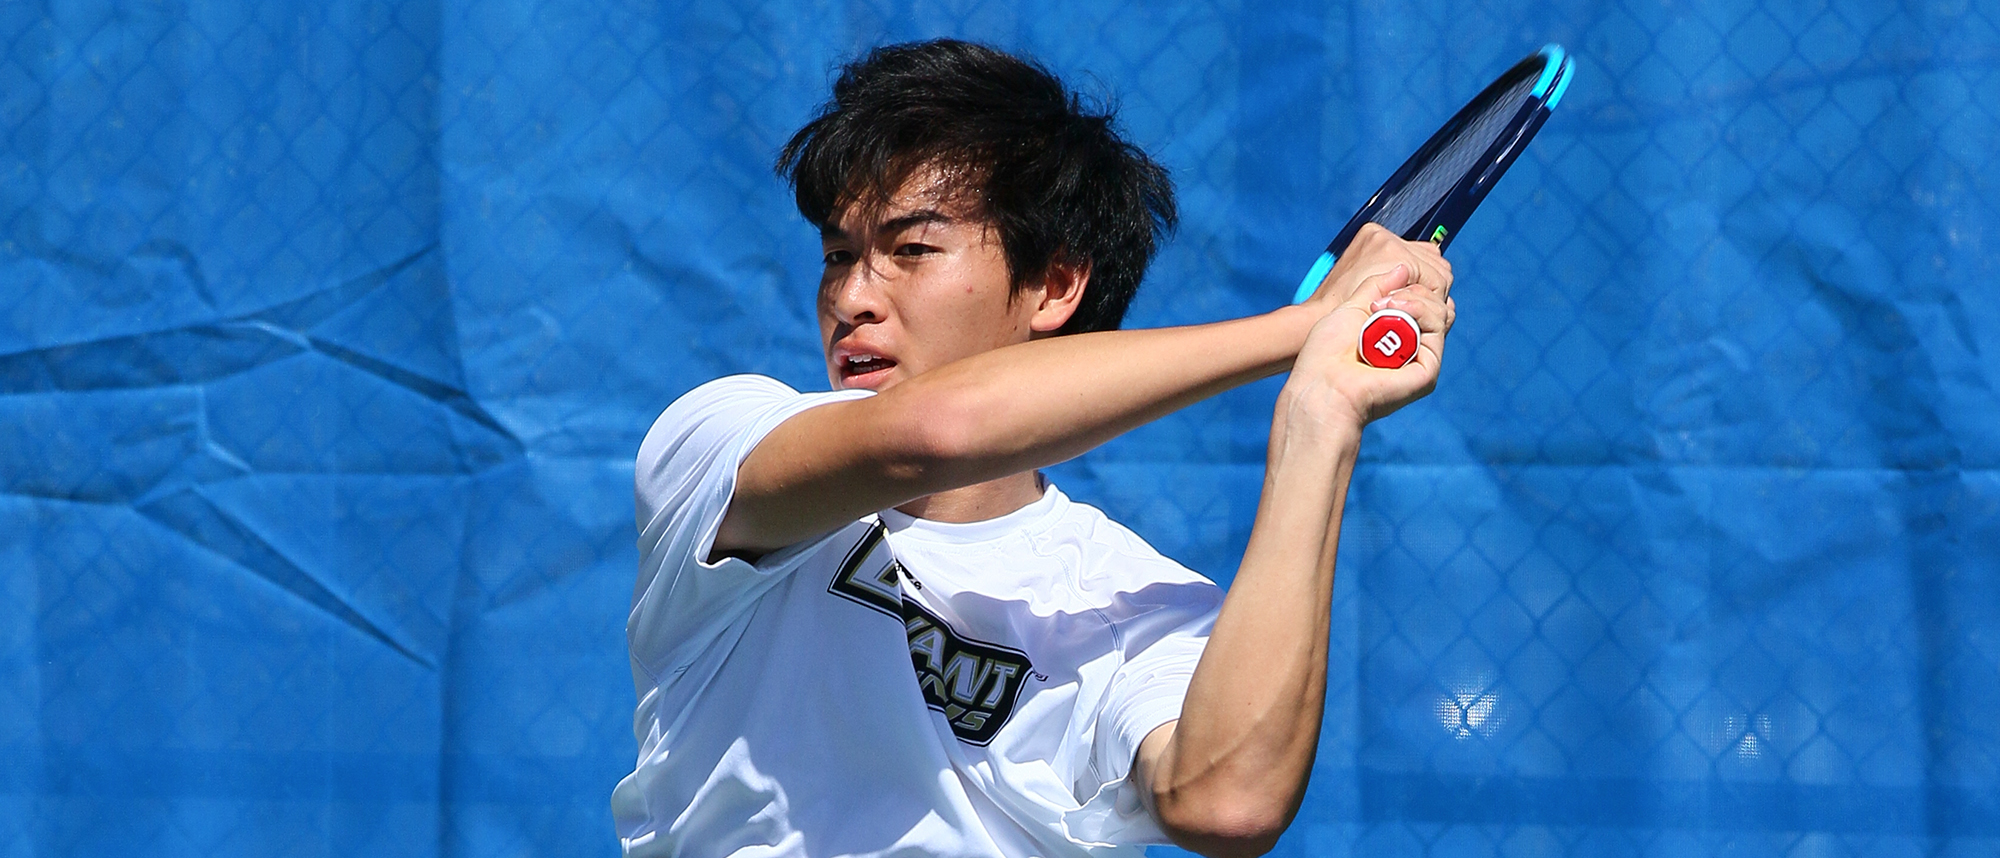 Kuhar, Dong become first ranked doubles team in NEC history